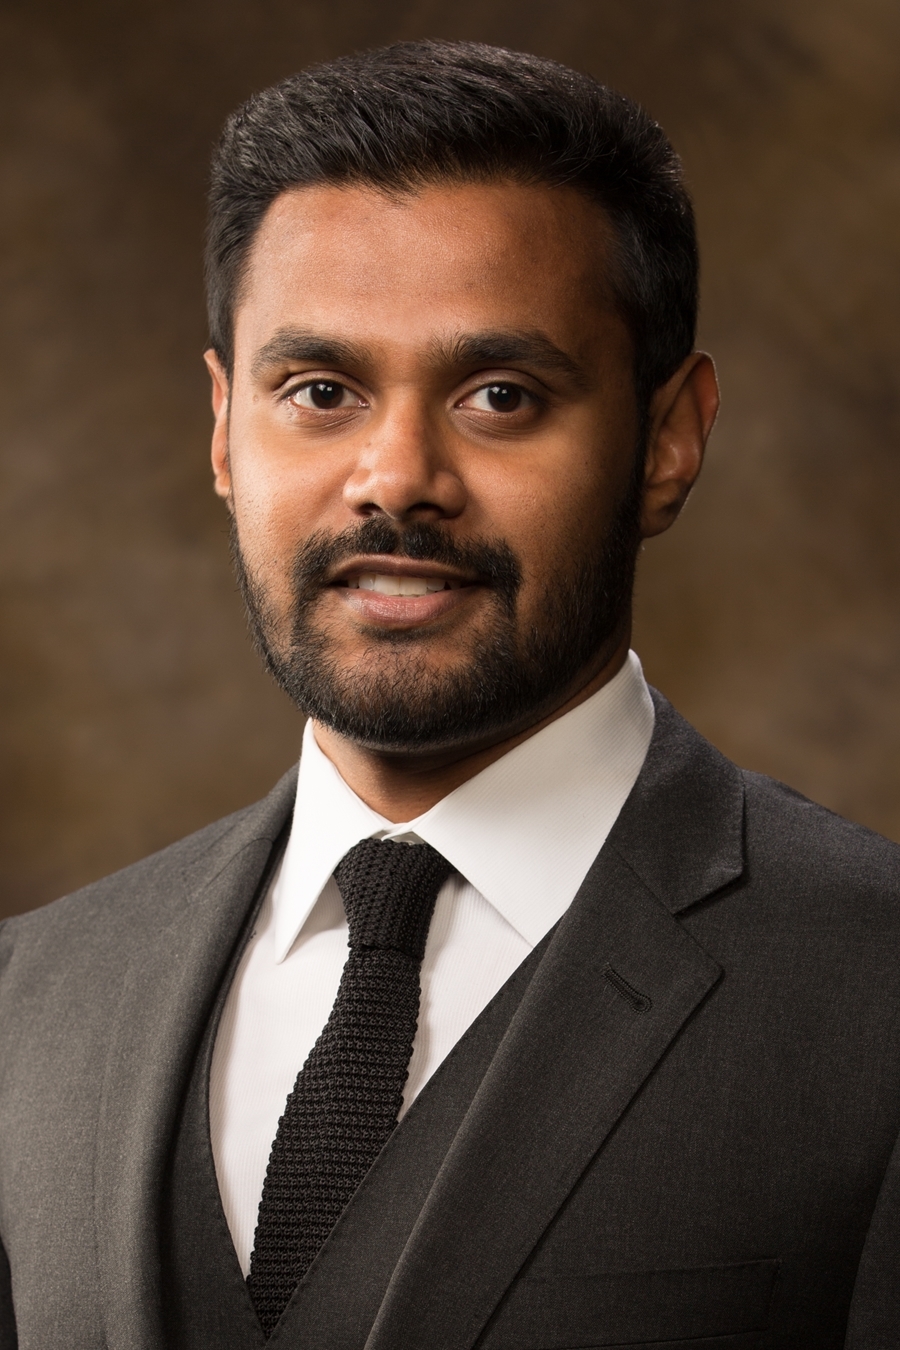 Mervin Jebaraj, director for the Center for Business and Economic Research at the Sam M. Walton College of Business, has been elected to the National Association for Business Economics Board.